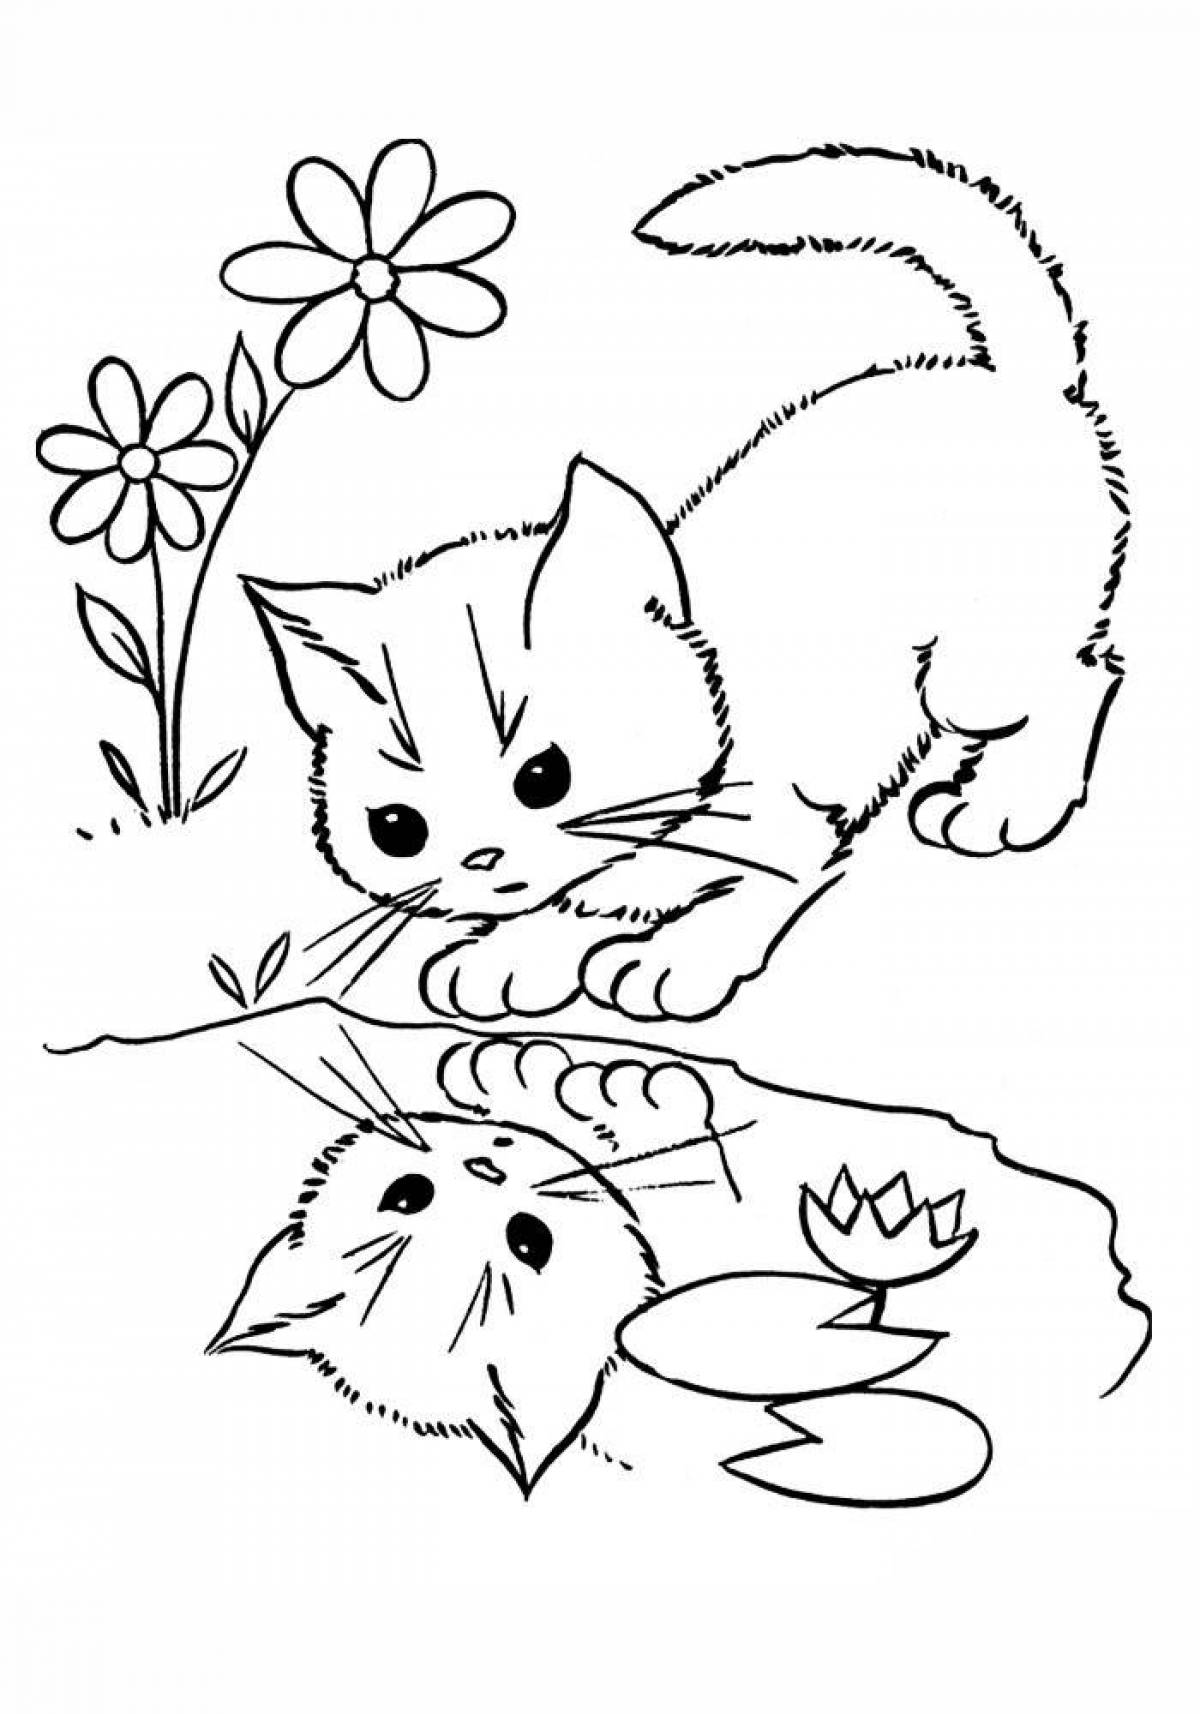 Interesting cat coloring book for children 6-7 years old